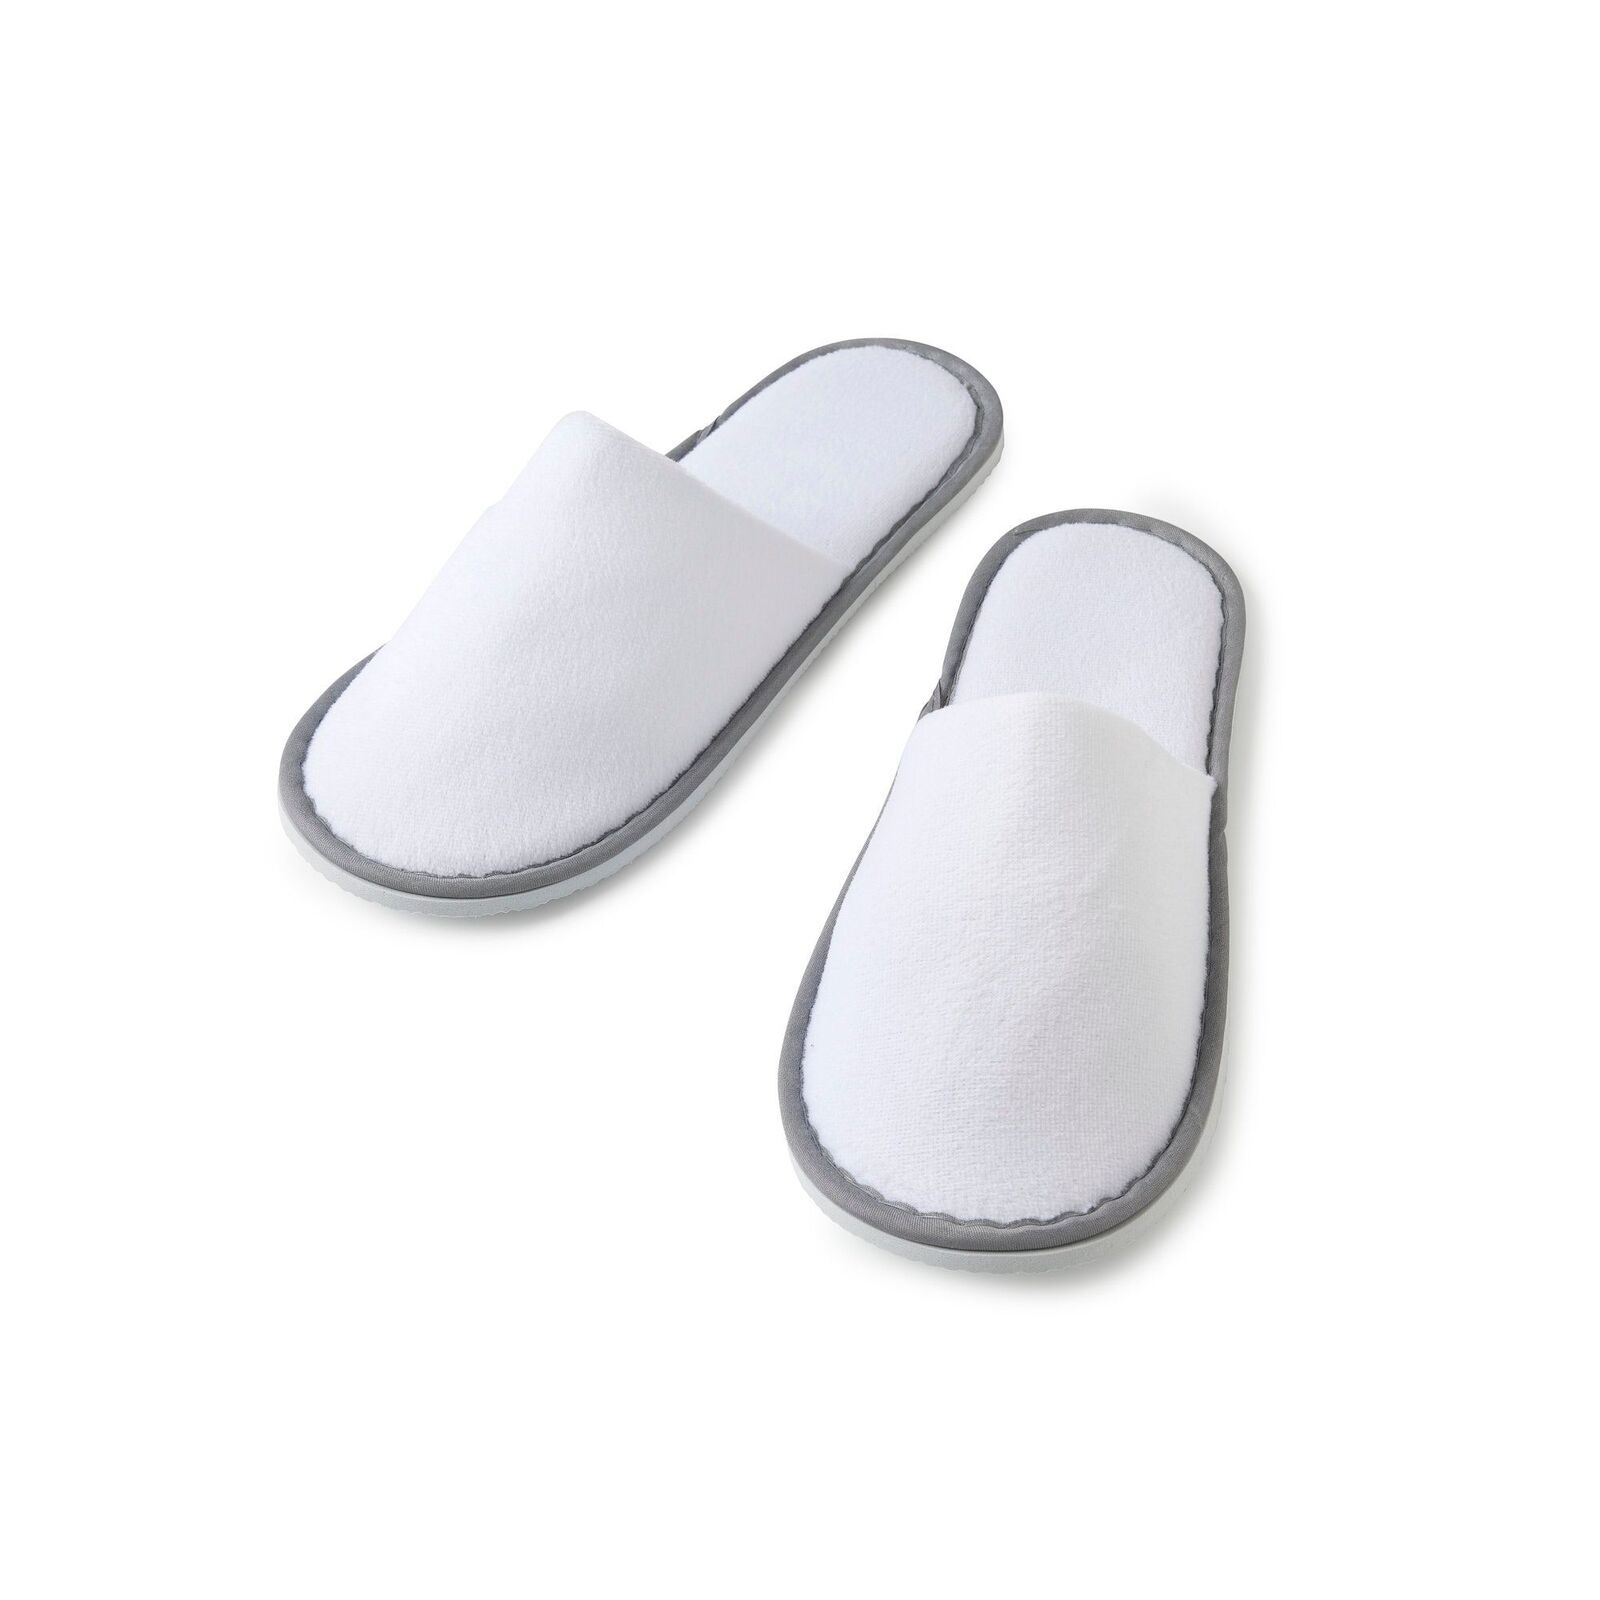 Personalised Hotel Slippers | Bnb Supplies